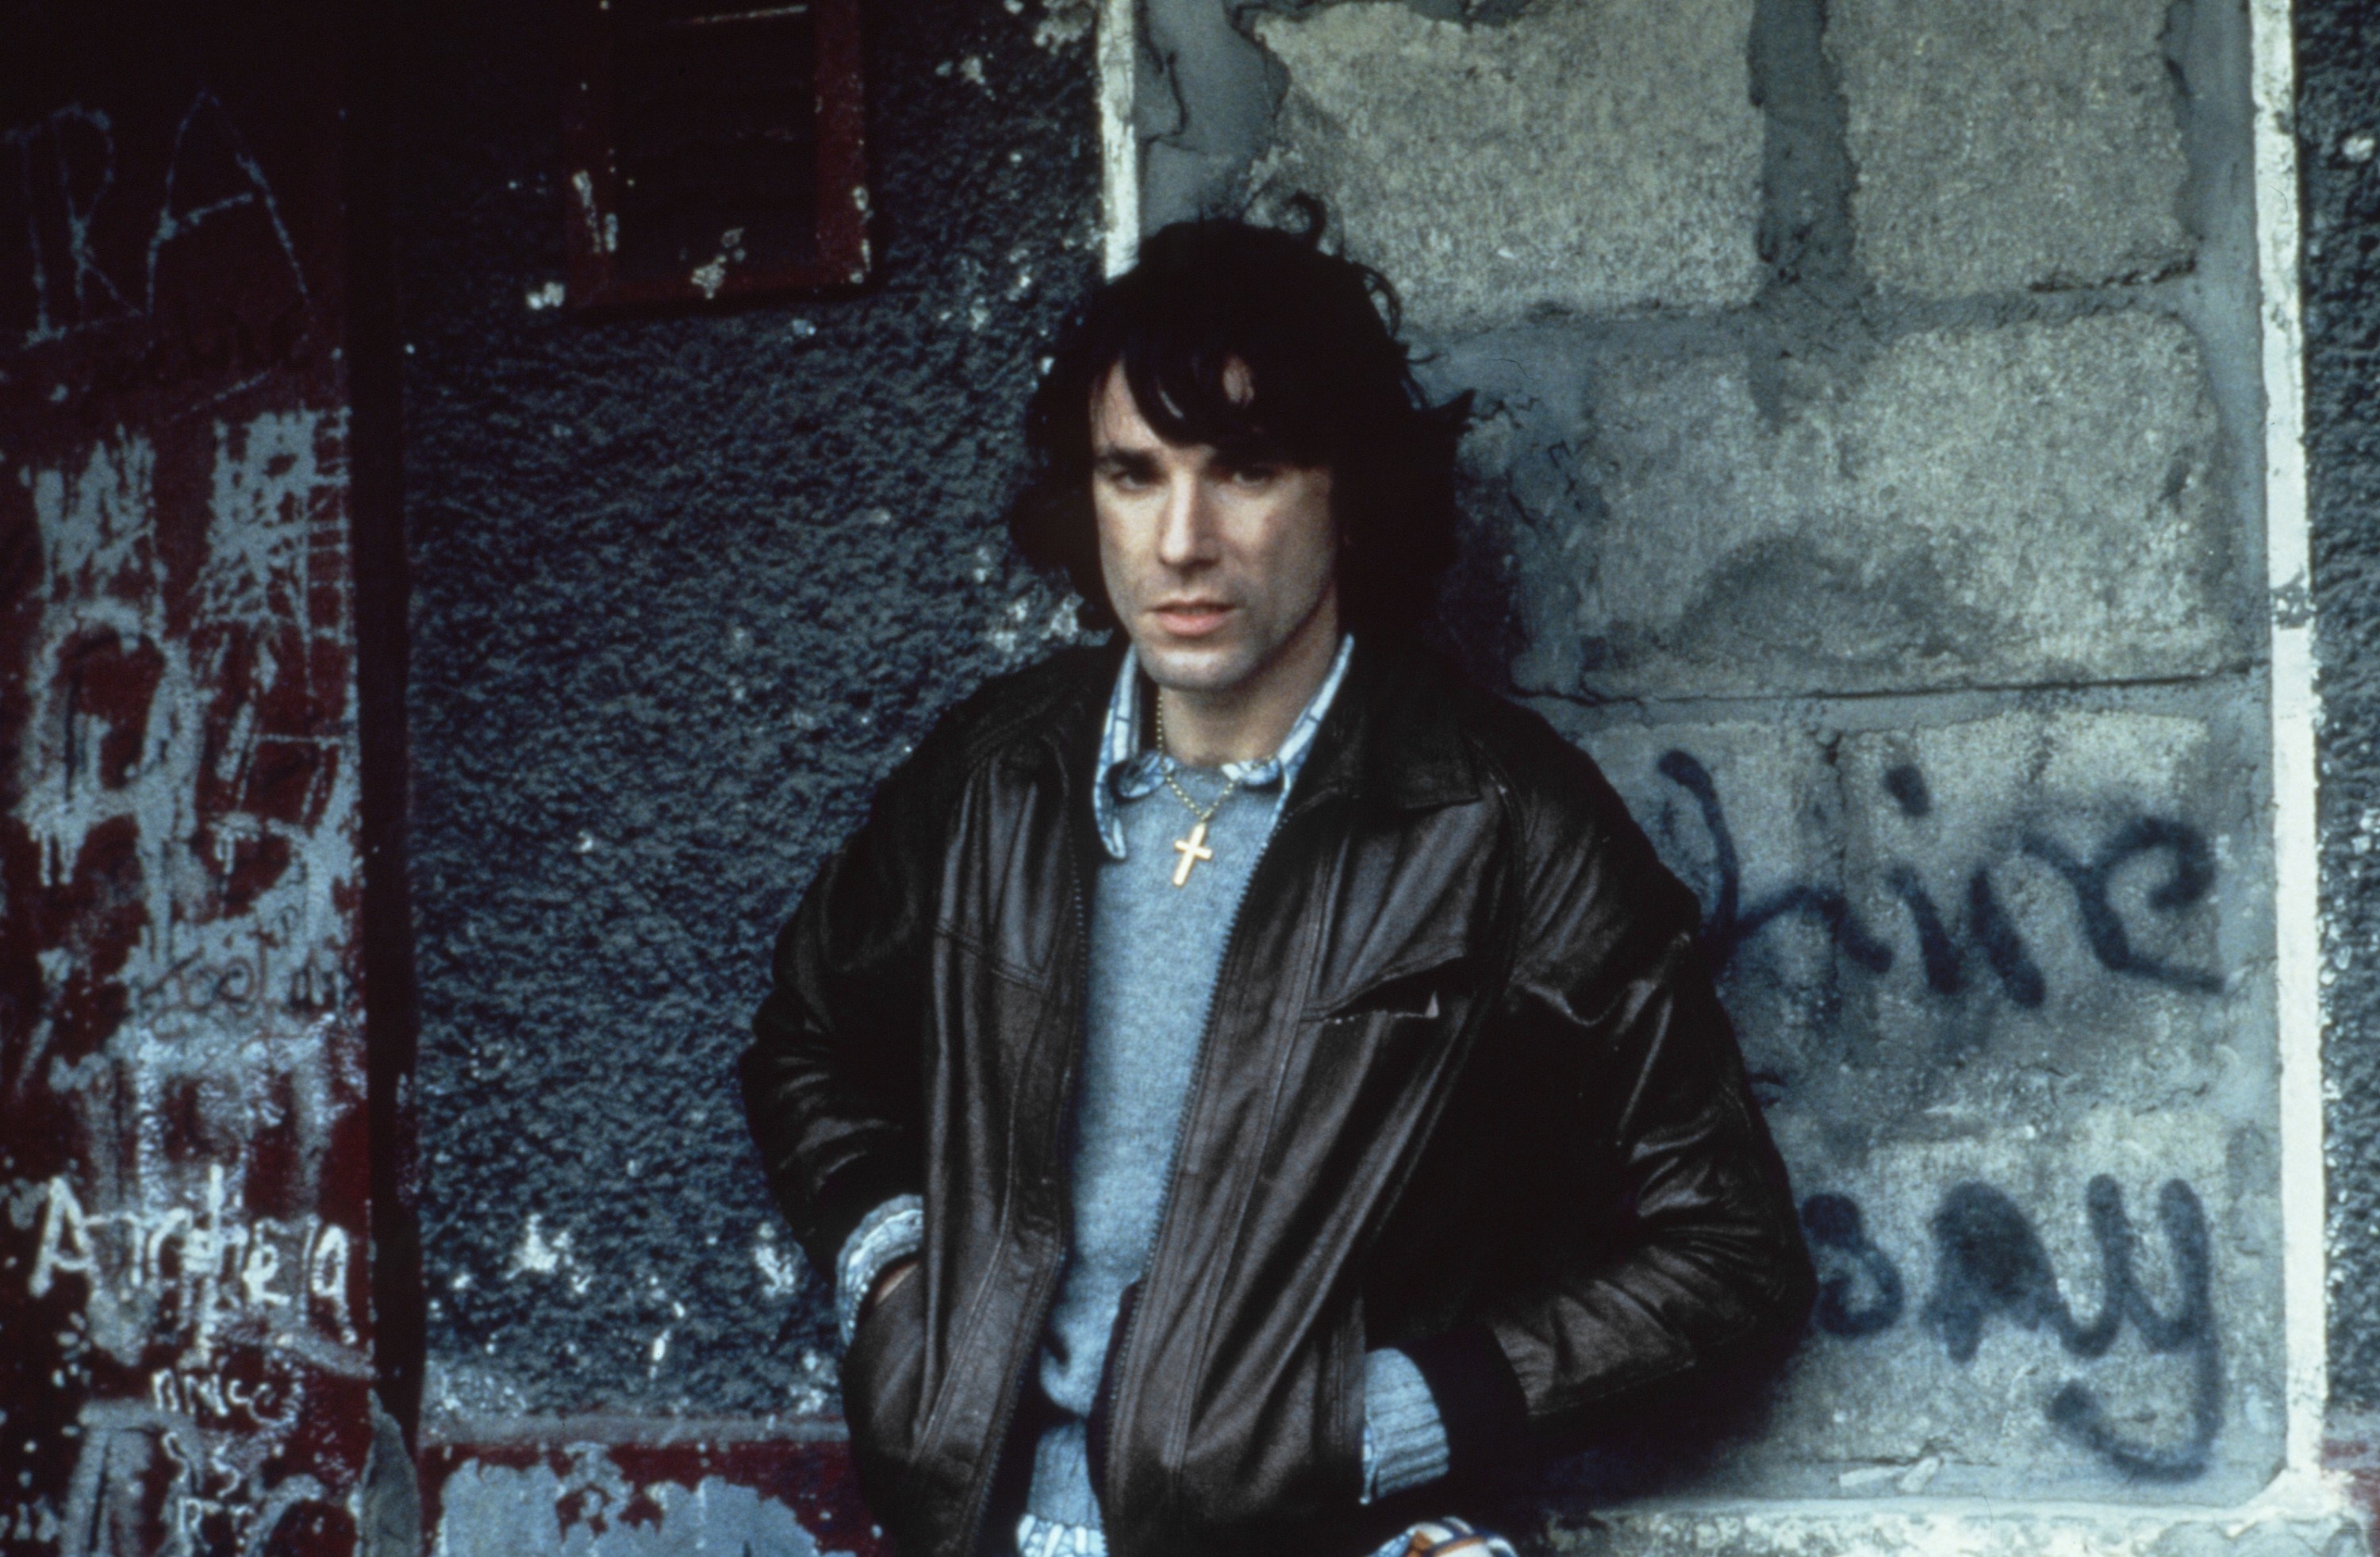 Daniel Day-Lewis leaning against a wall with graffitti